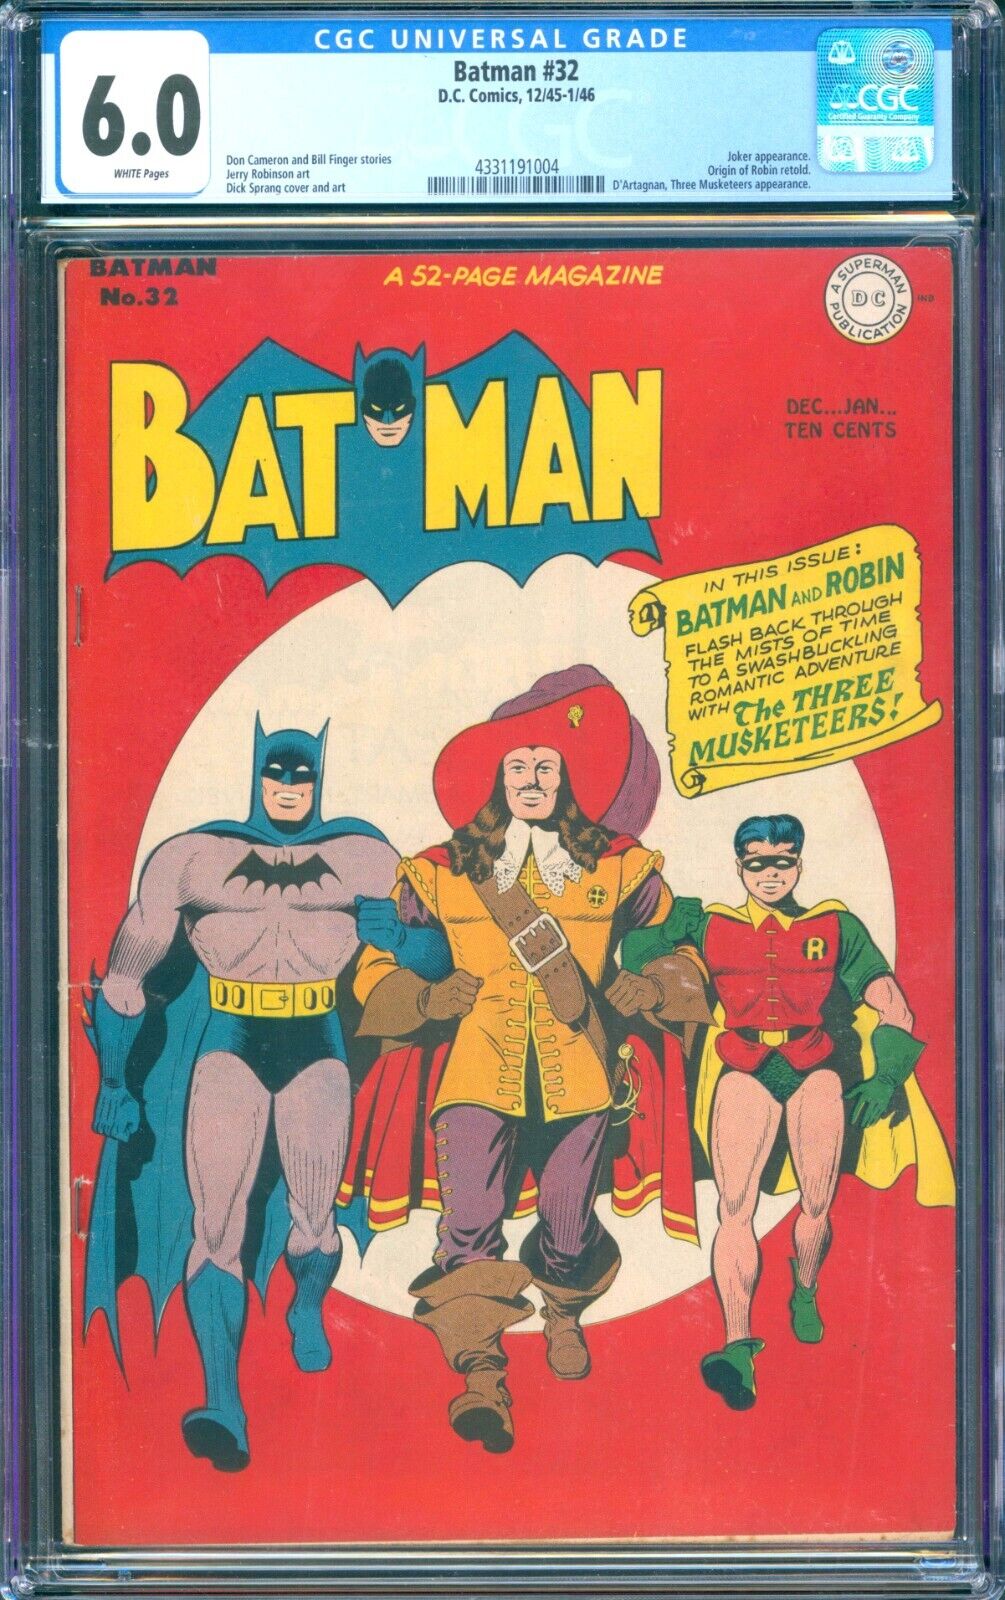 BATMAN #32  CGC 6.0 FINE  BRIGHT WHITE PAGES  NICE EYE APPEAL  BRIGHT COLORS